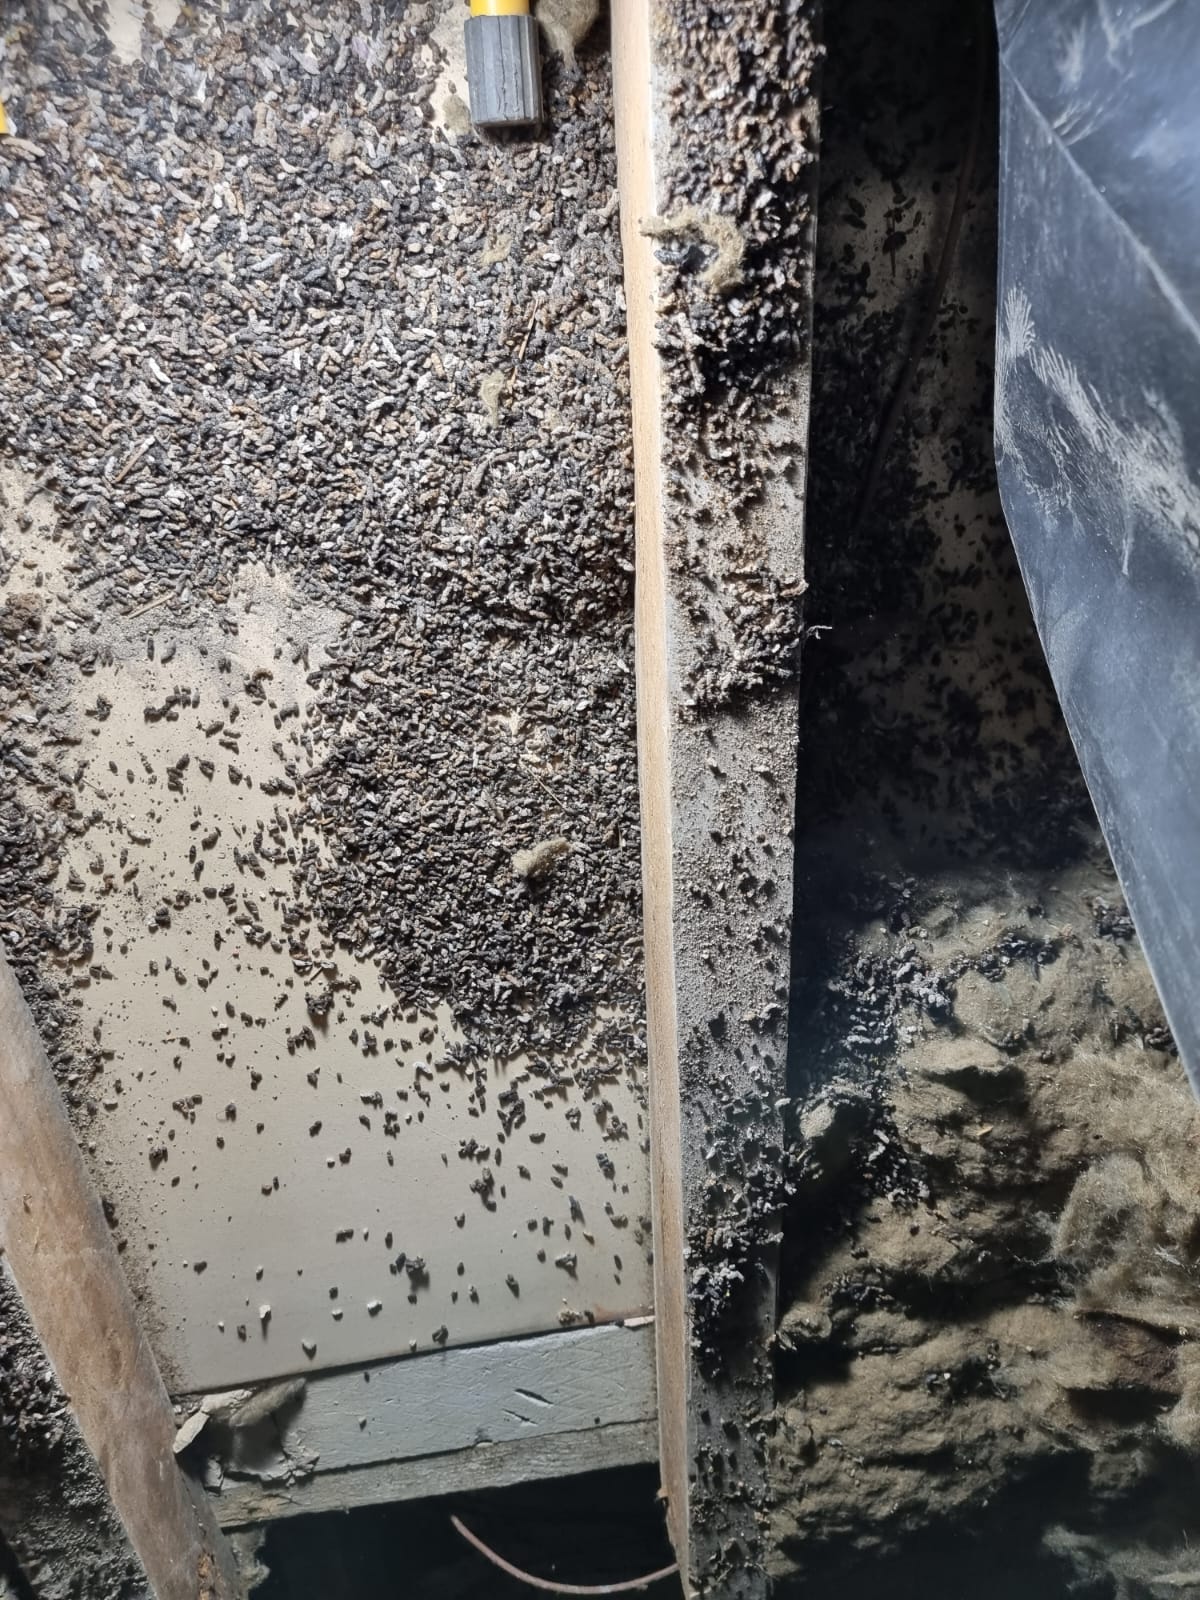 Rodent Droppings in loft